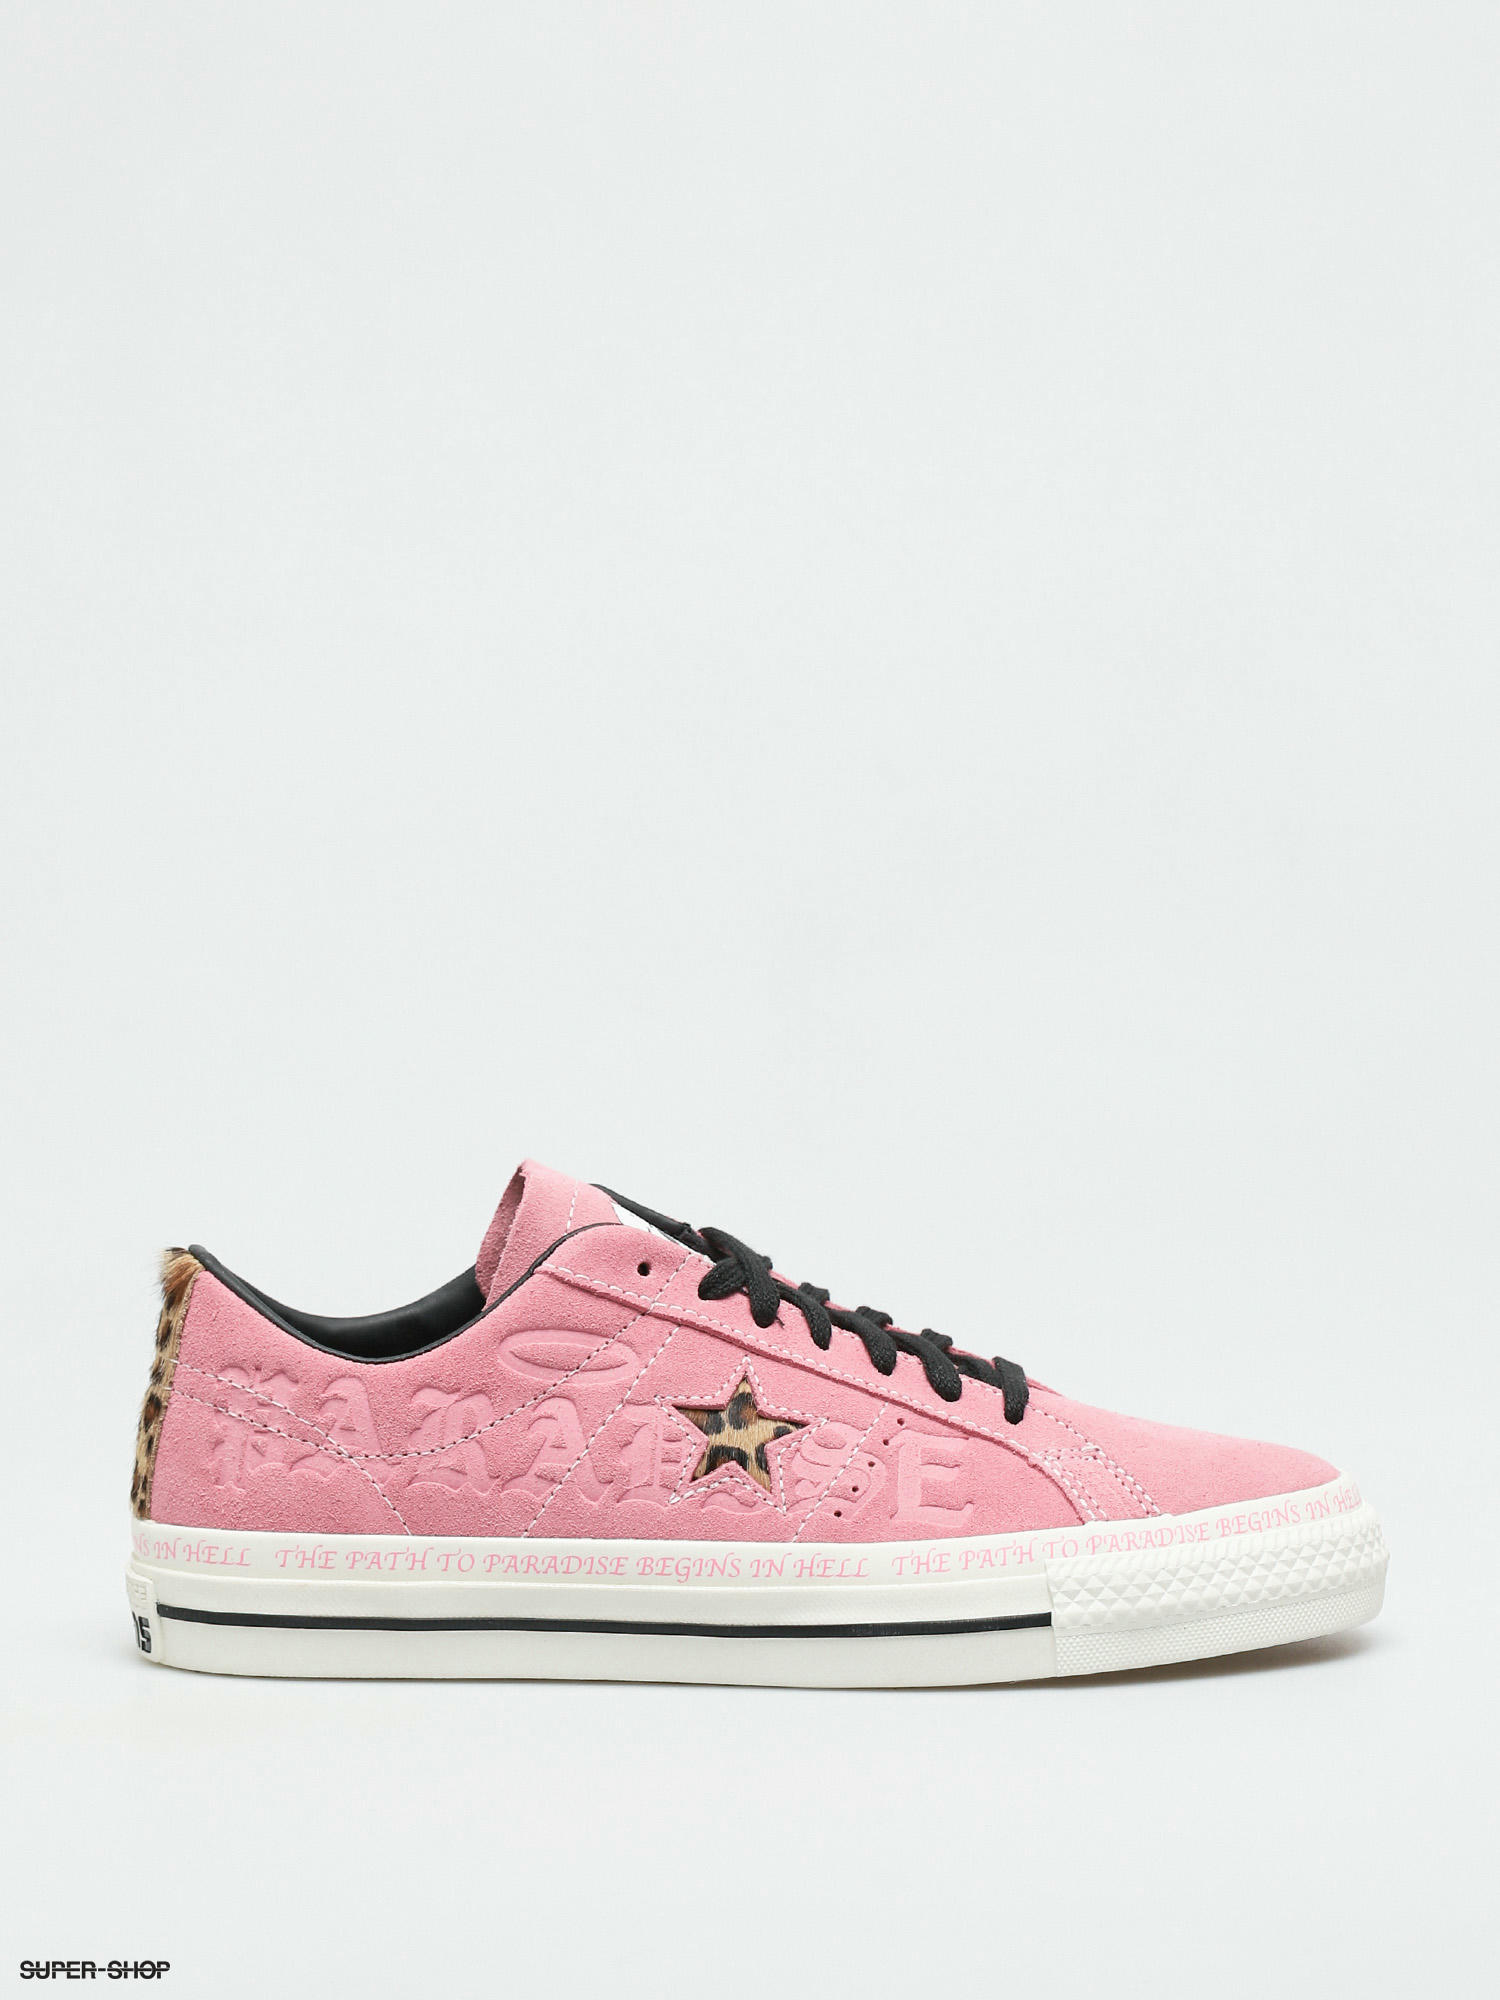 converse one star pro pink